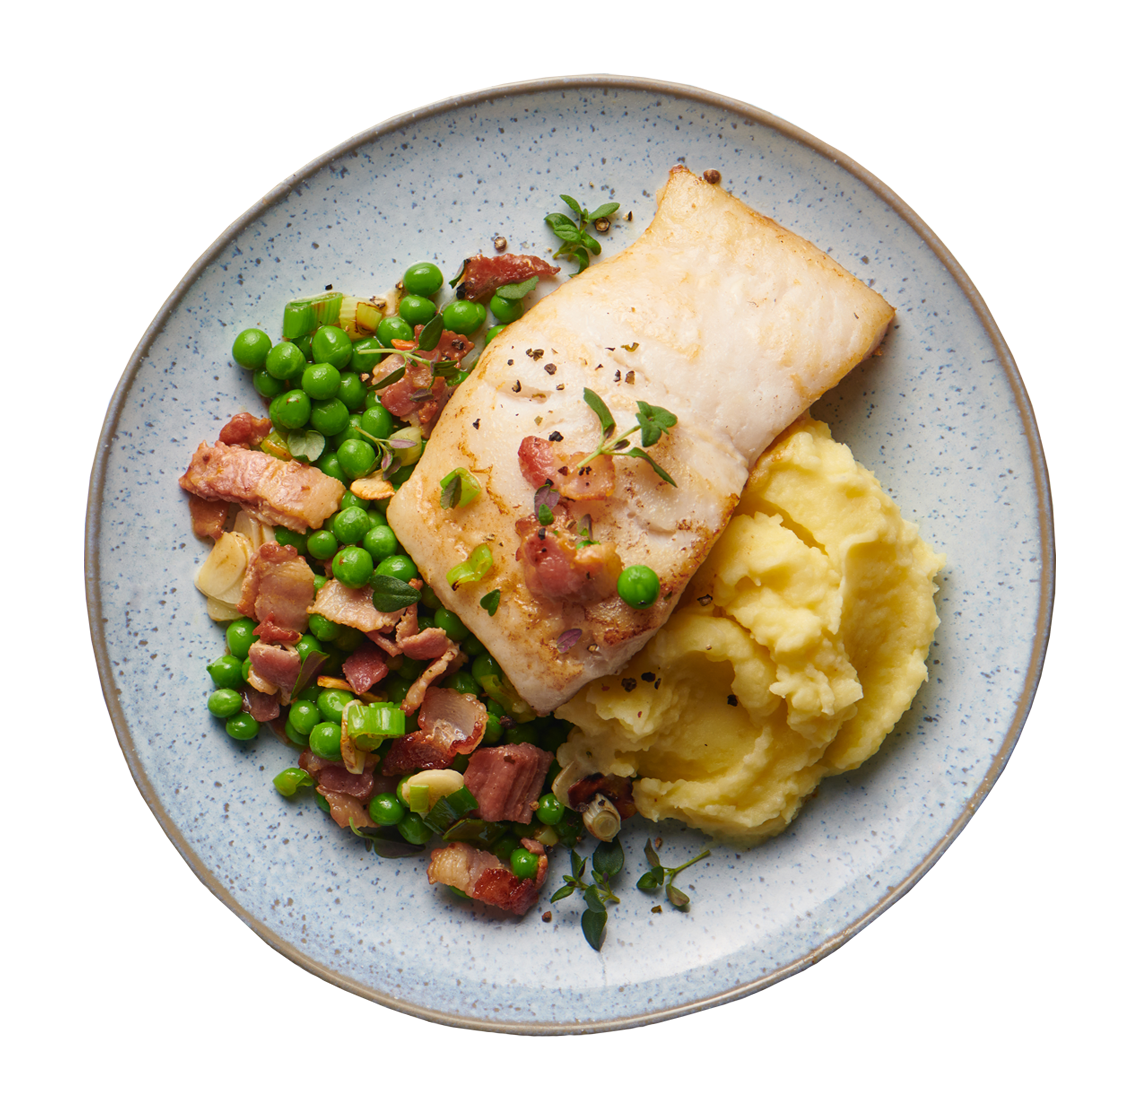 Fred’s pan-fried hake with buttered mash, peas and pancetta